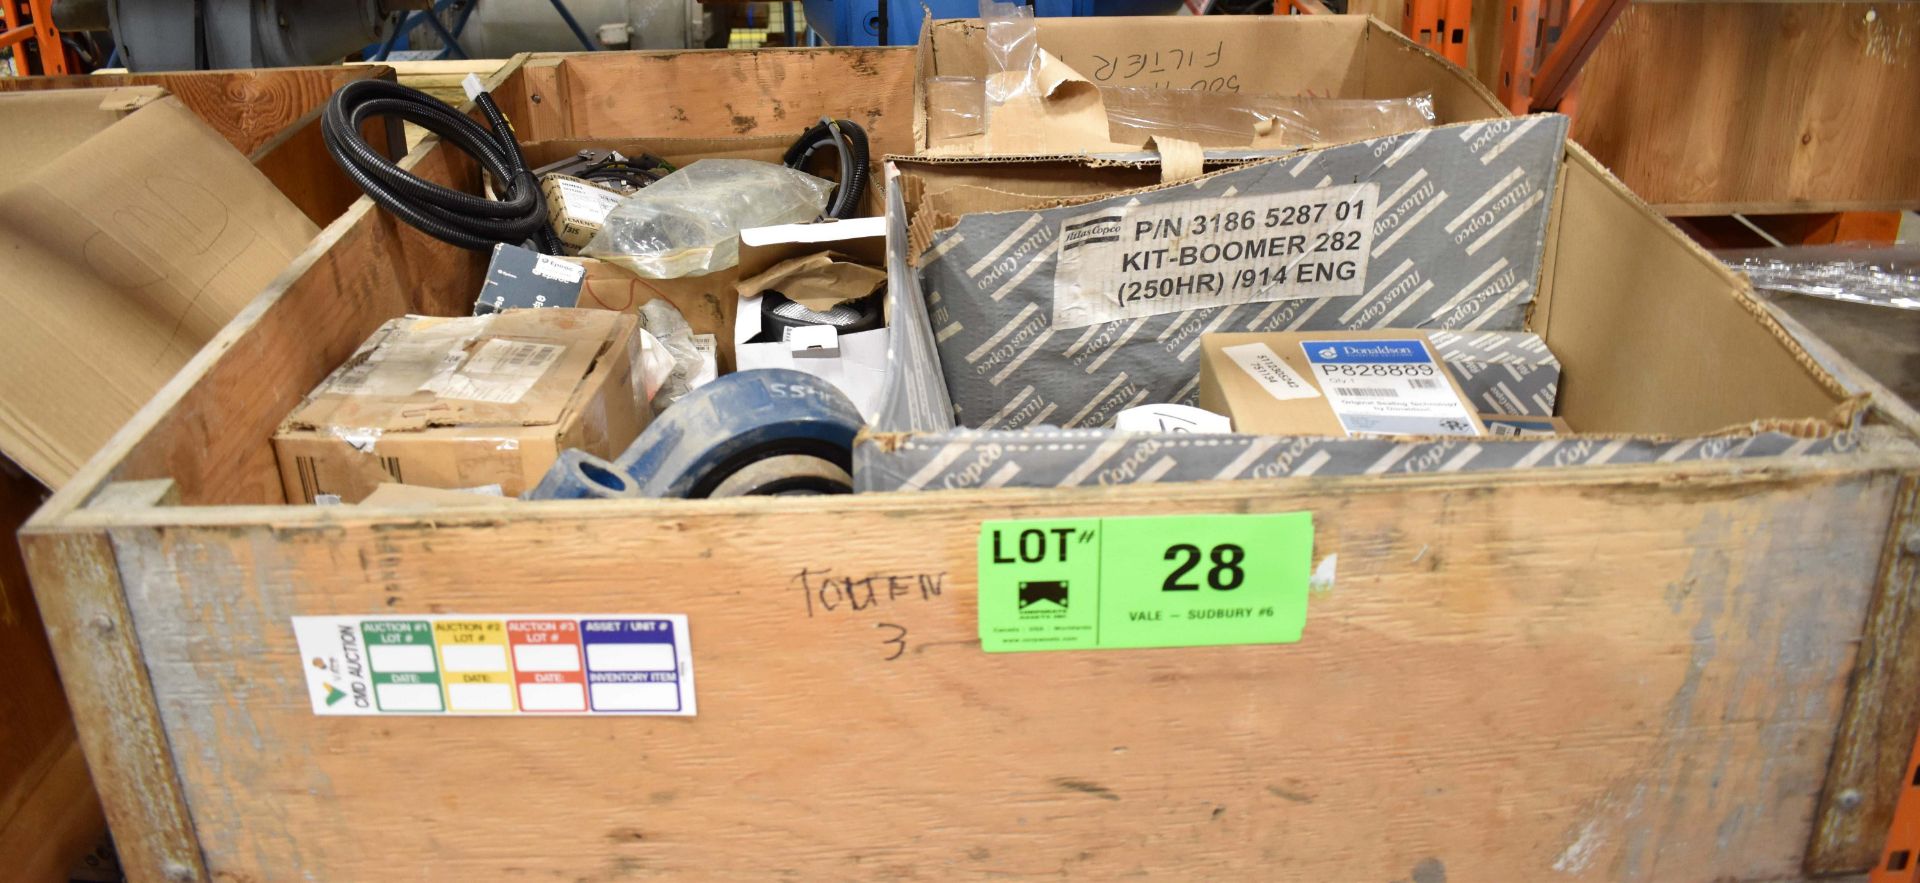 LOT/ CRATE WITH EPIROC MOBILE EQUIPMENT PARTS (CMD WAREHOUSE - 09010202)